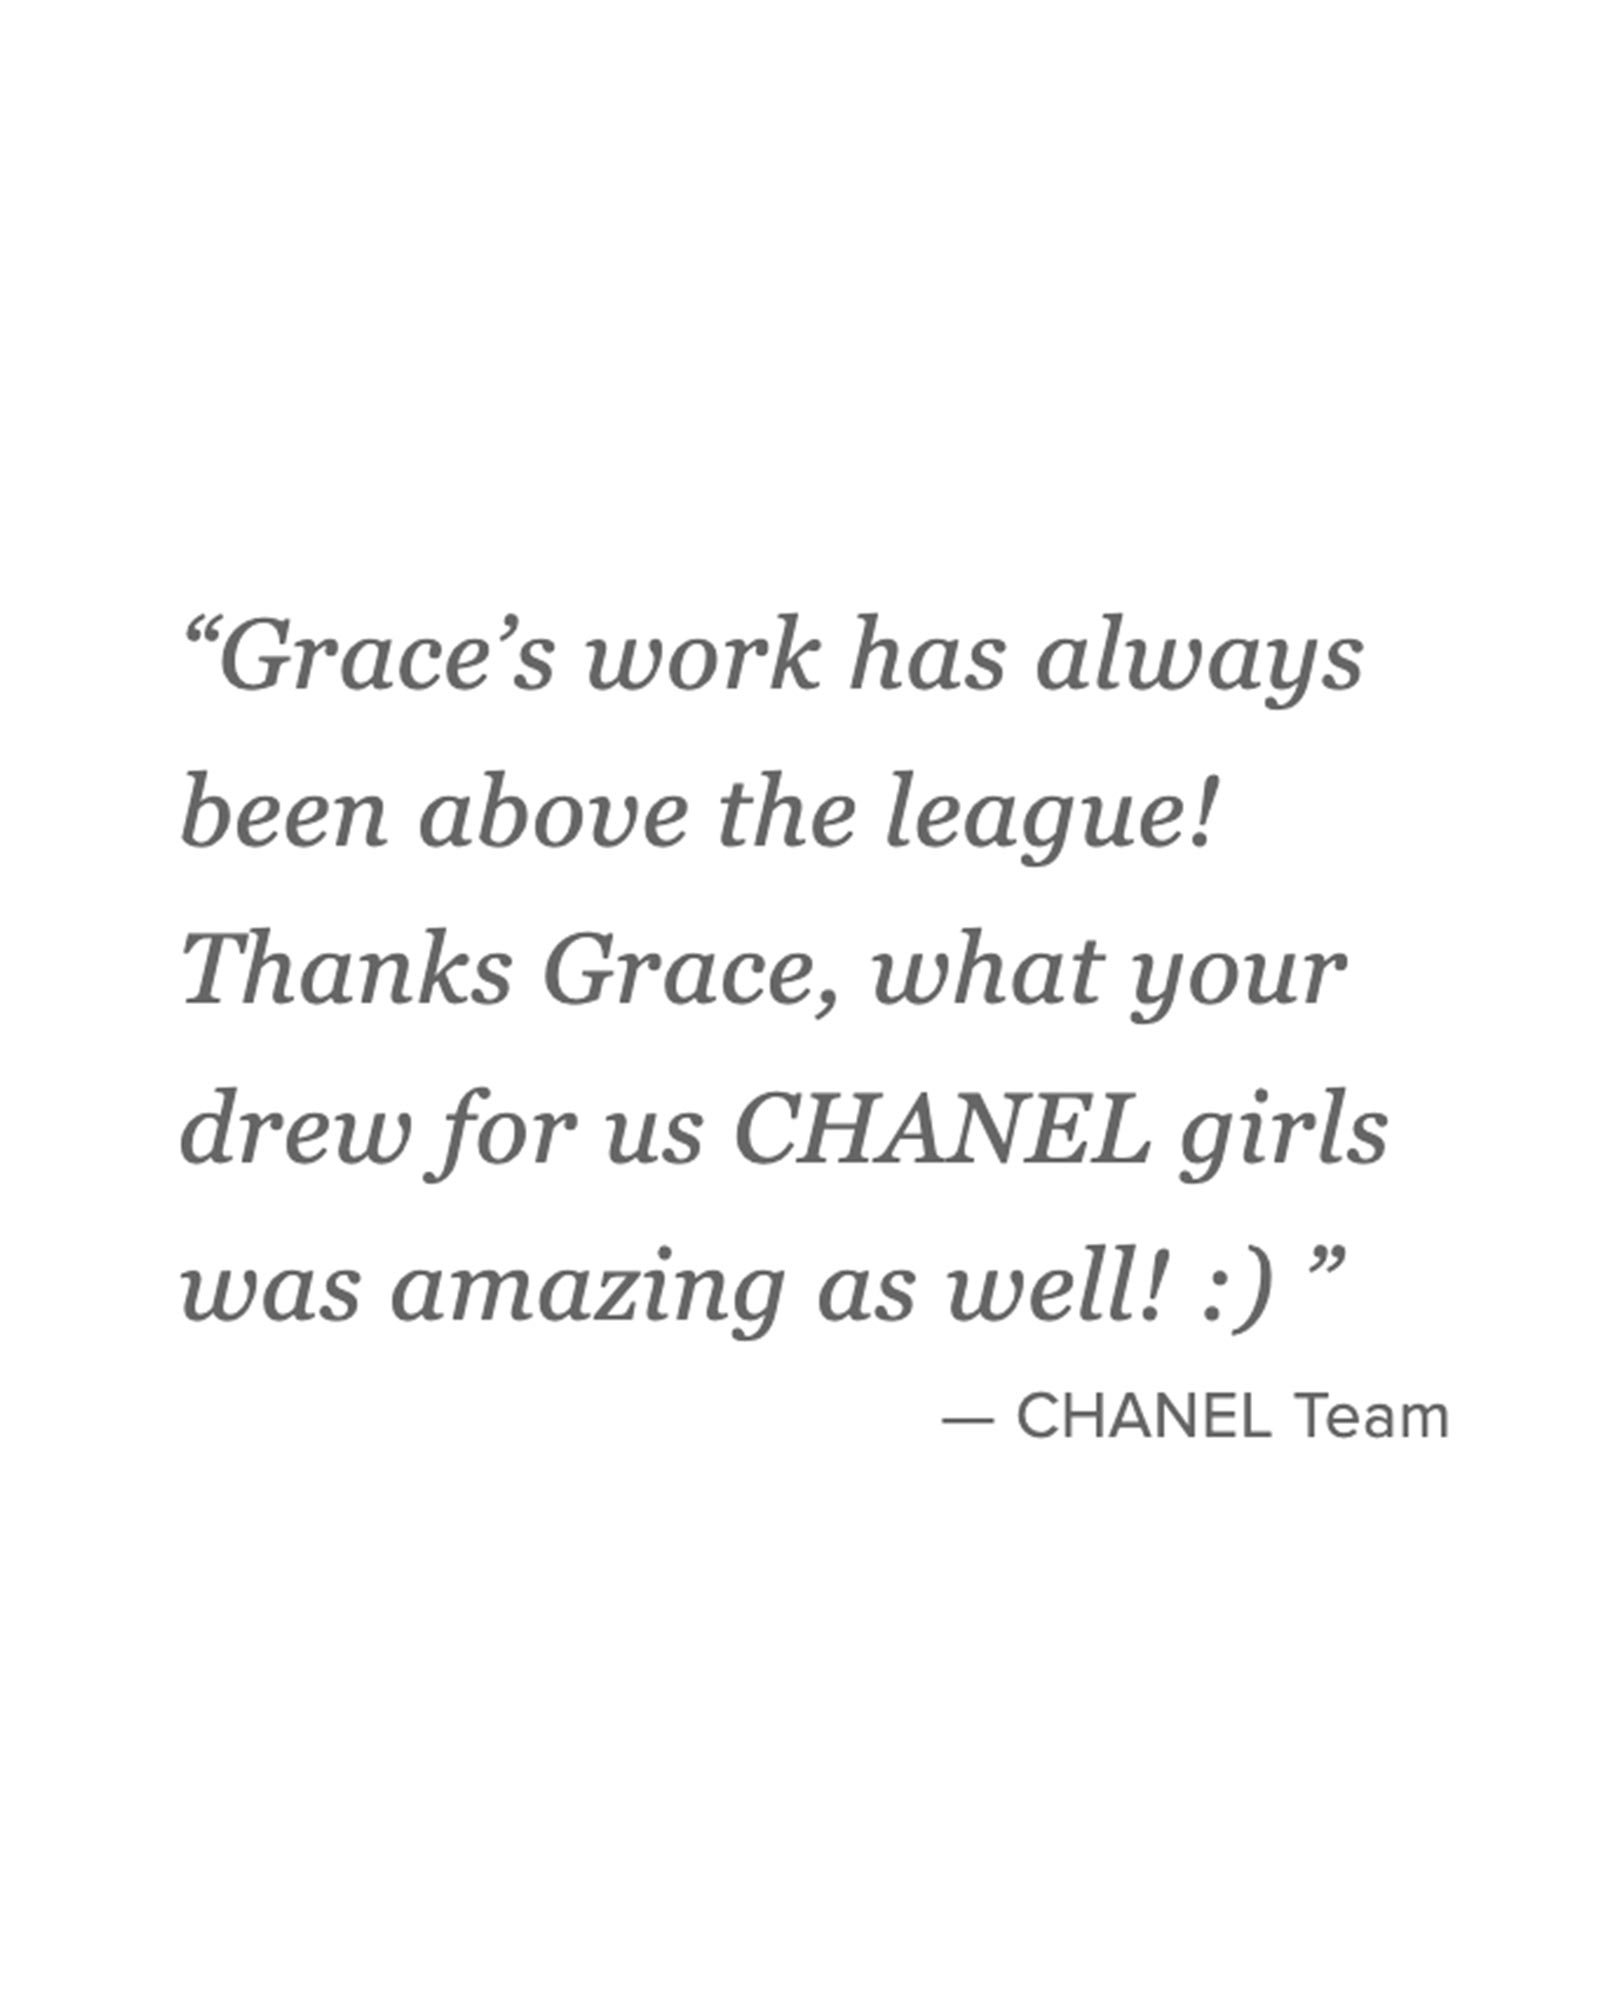 Chanel-Grace-Ciao-Review.jpg